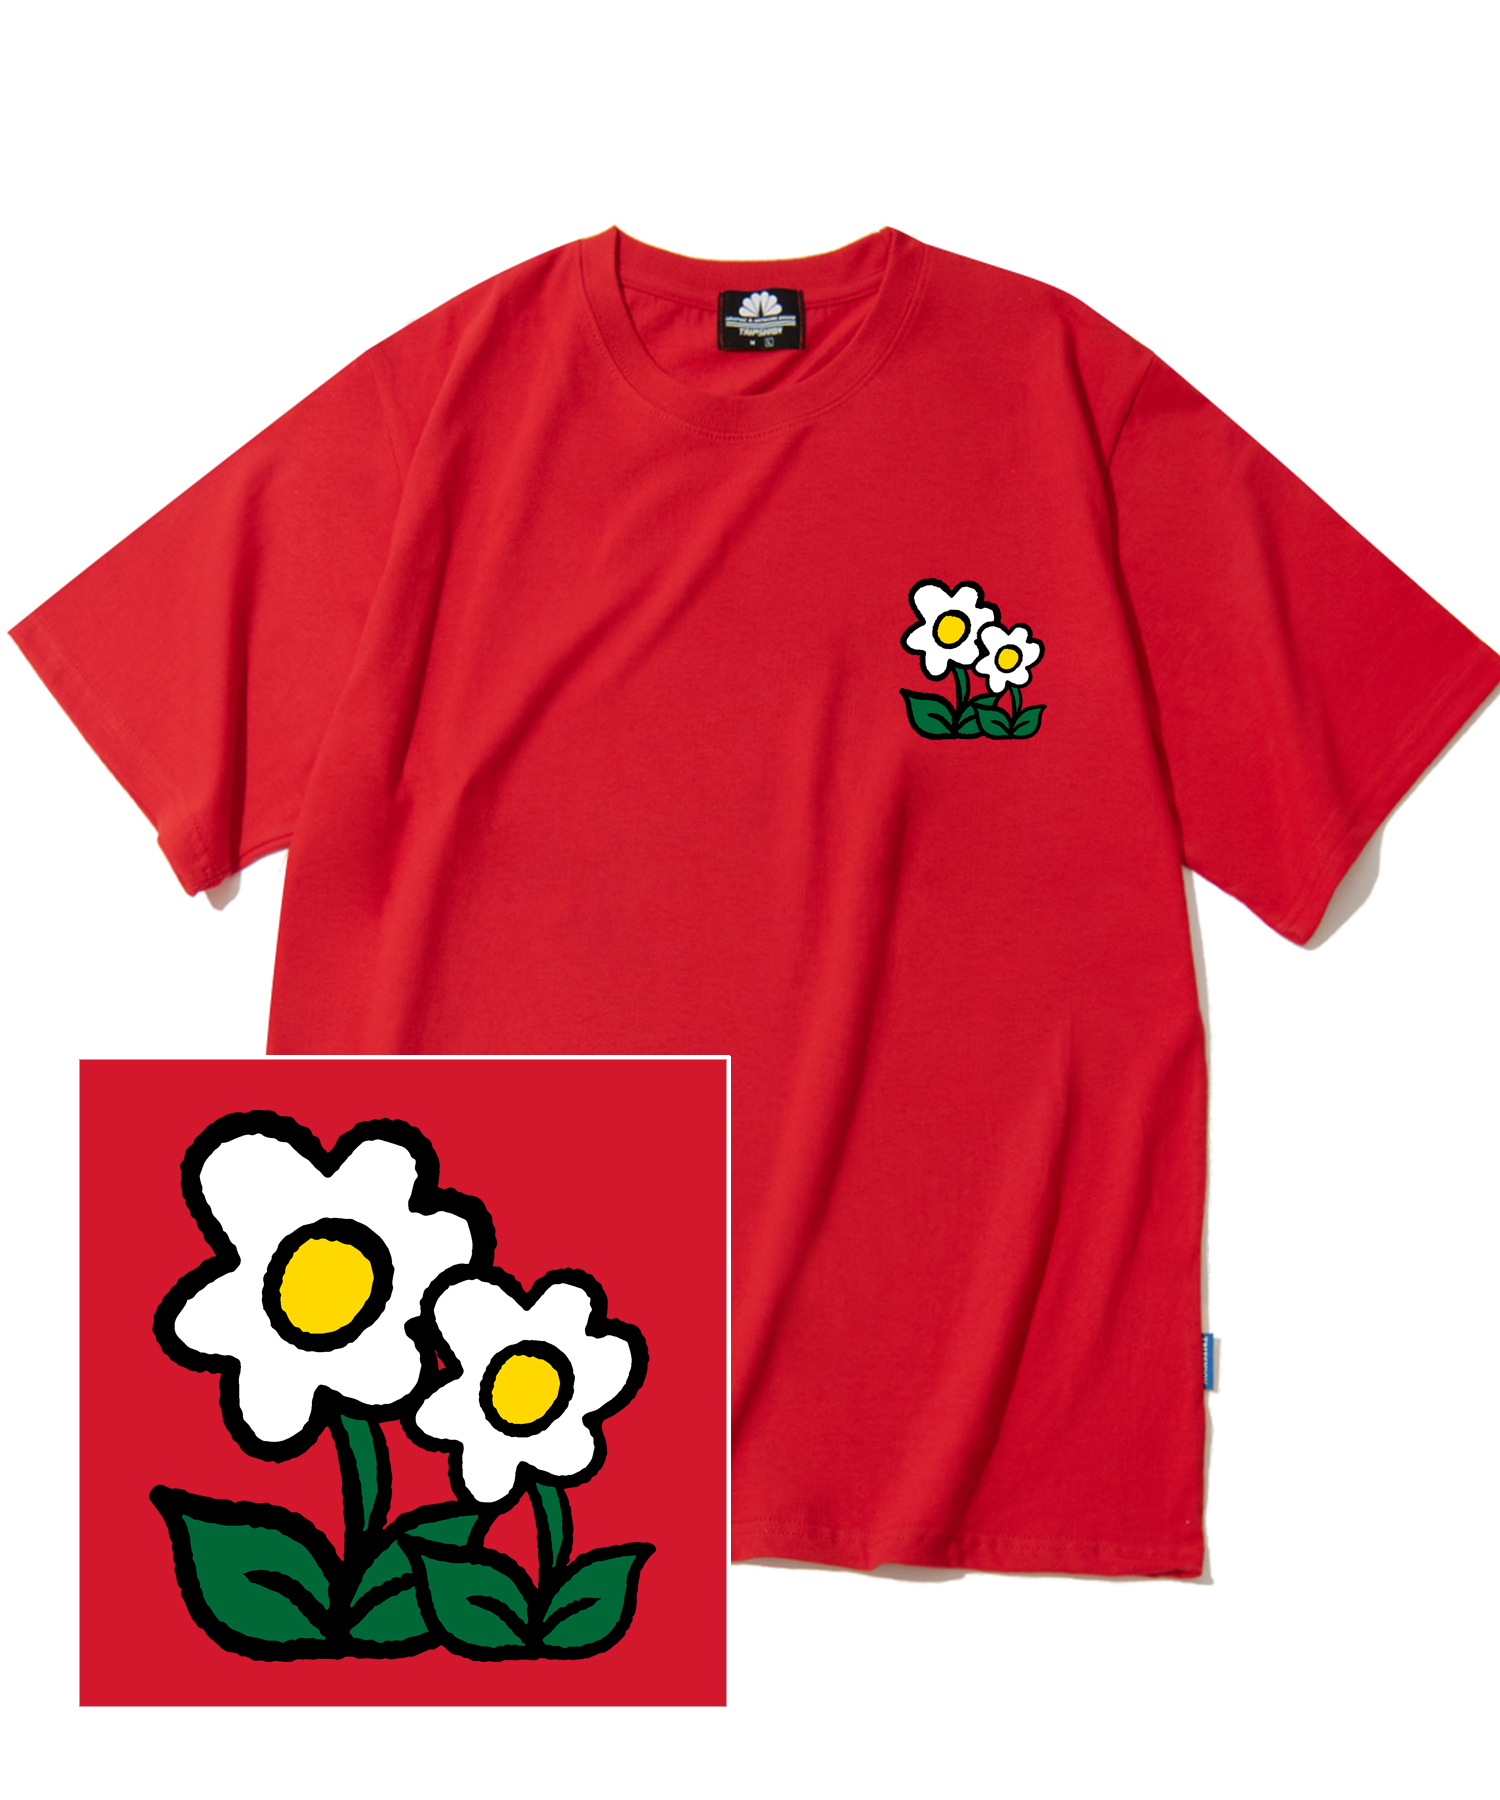 DOUBLE FLOWER LOGO T-SHIRTS - RED